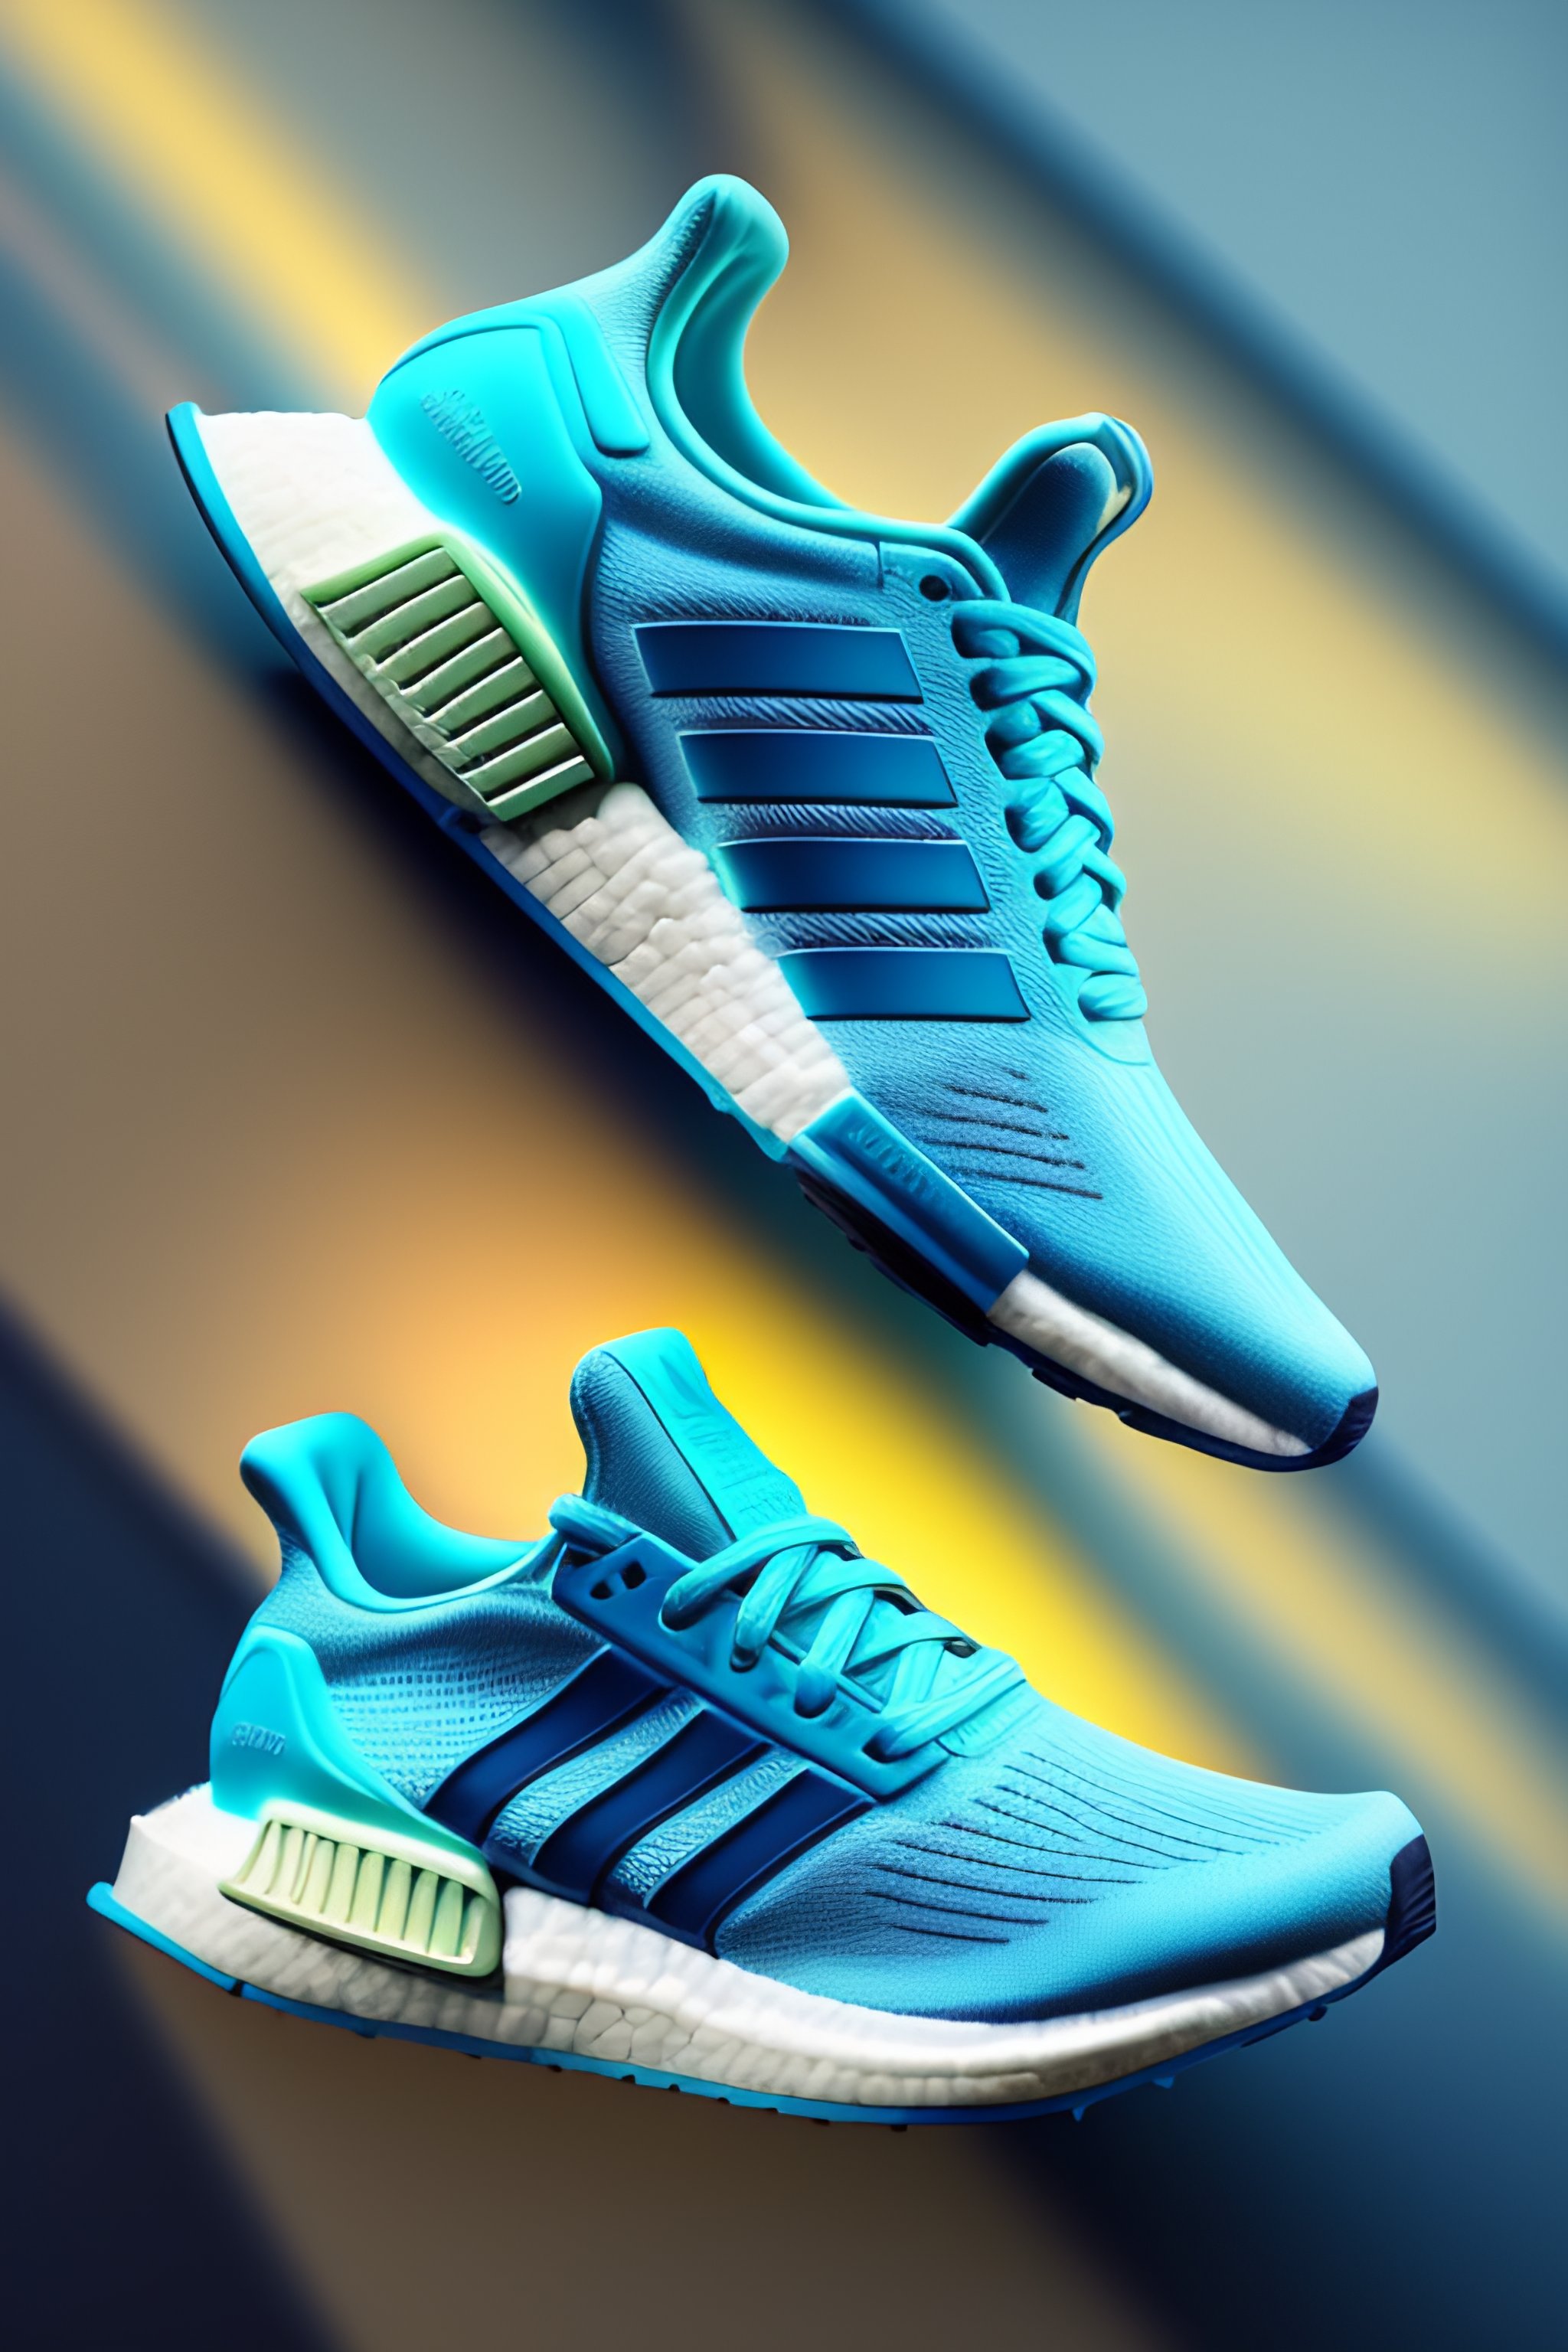 Lexica - Light blue adidas shoes for running sketch